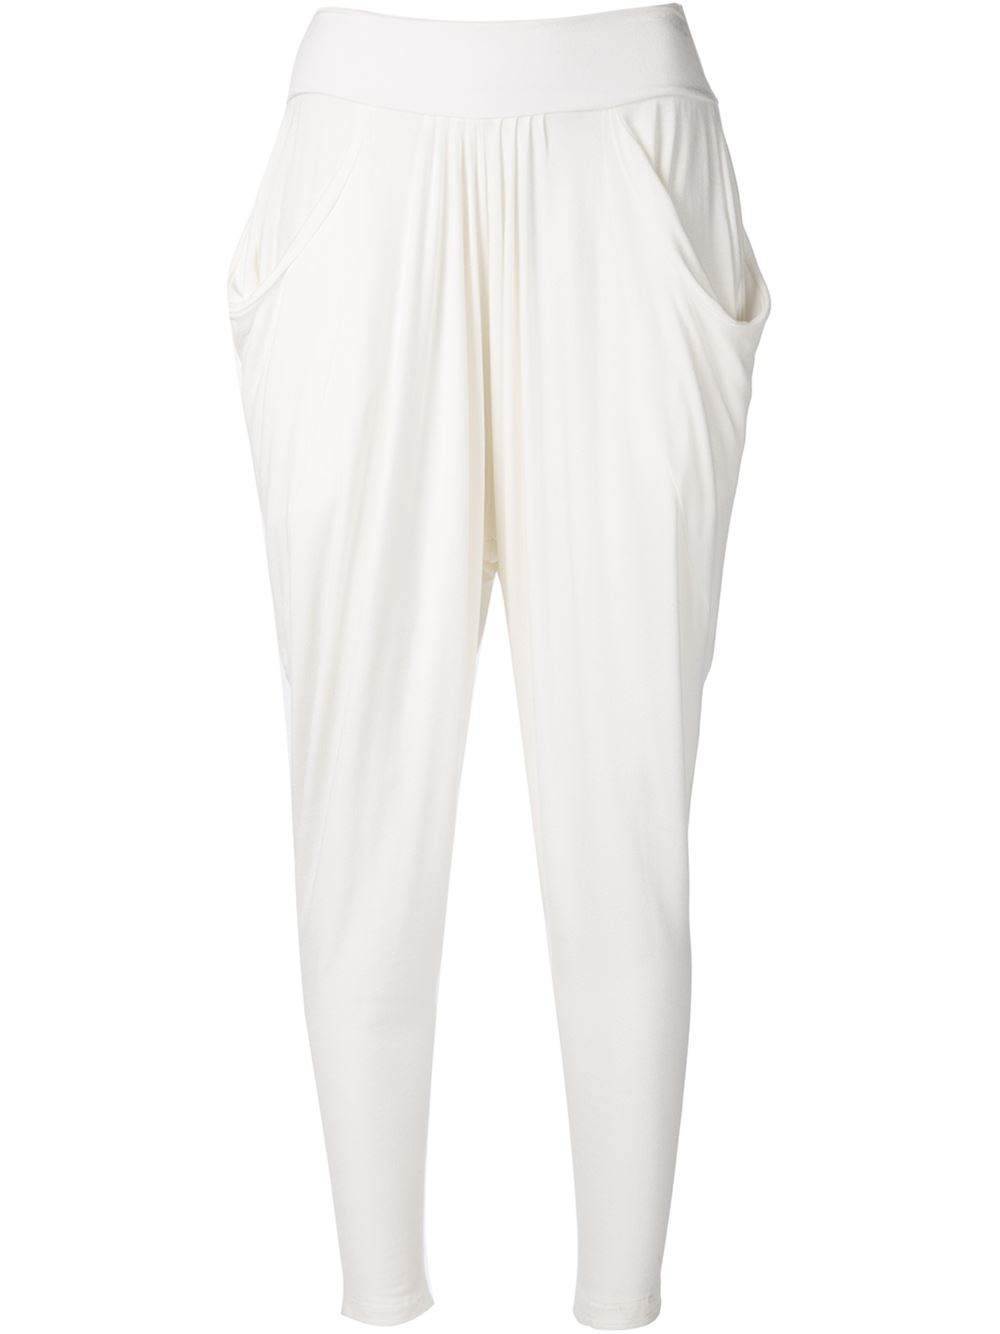 white jersey trousers